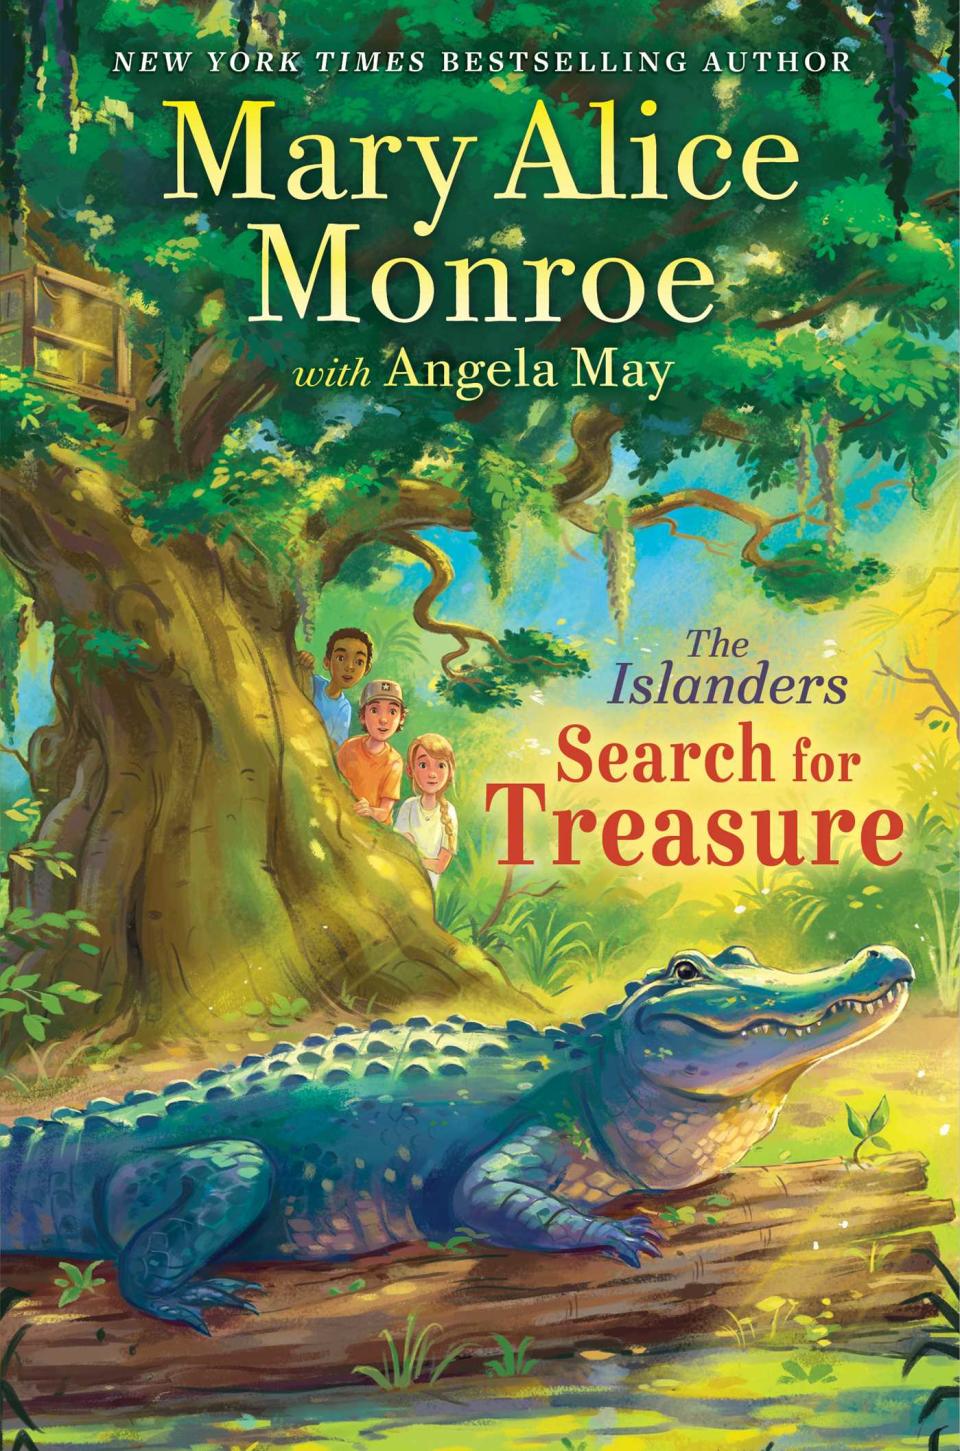 'The Islanders: Search for Treasure' by Mary Alice Monroe and Angela May